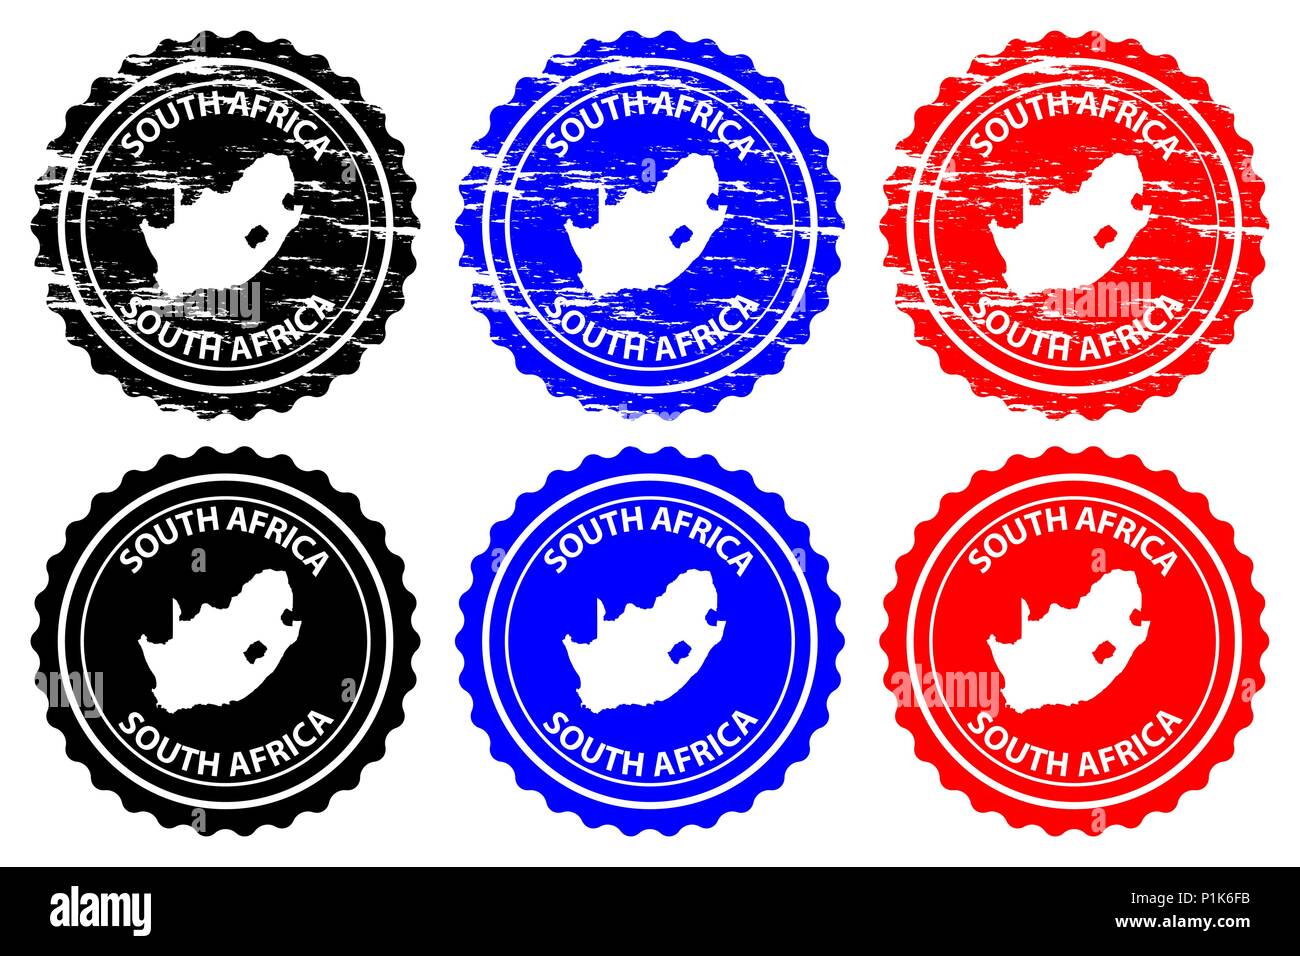 South Africa - rubber stamp - vector, Republic of South Africa (RSA) map pattern - sticker - black, blue and red Stock Vector